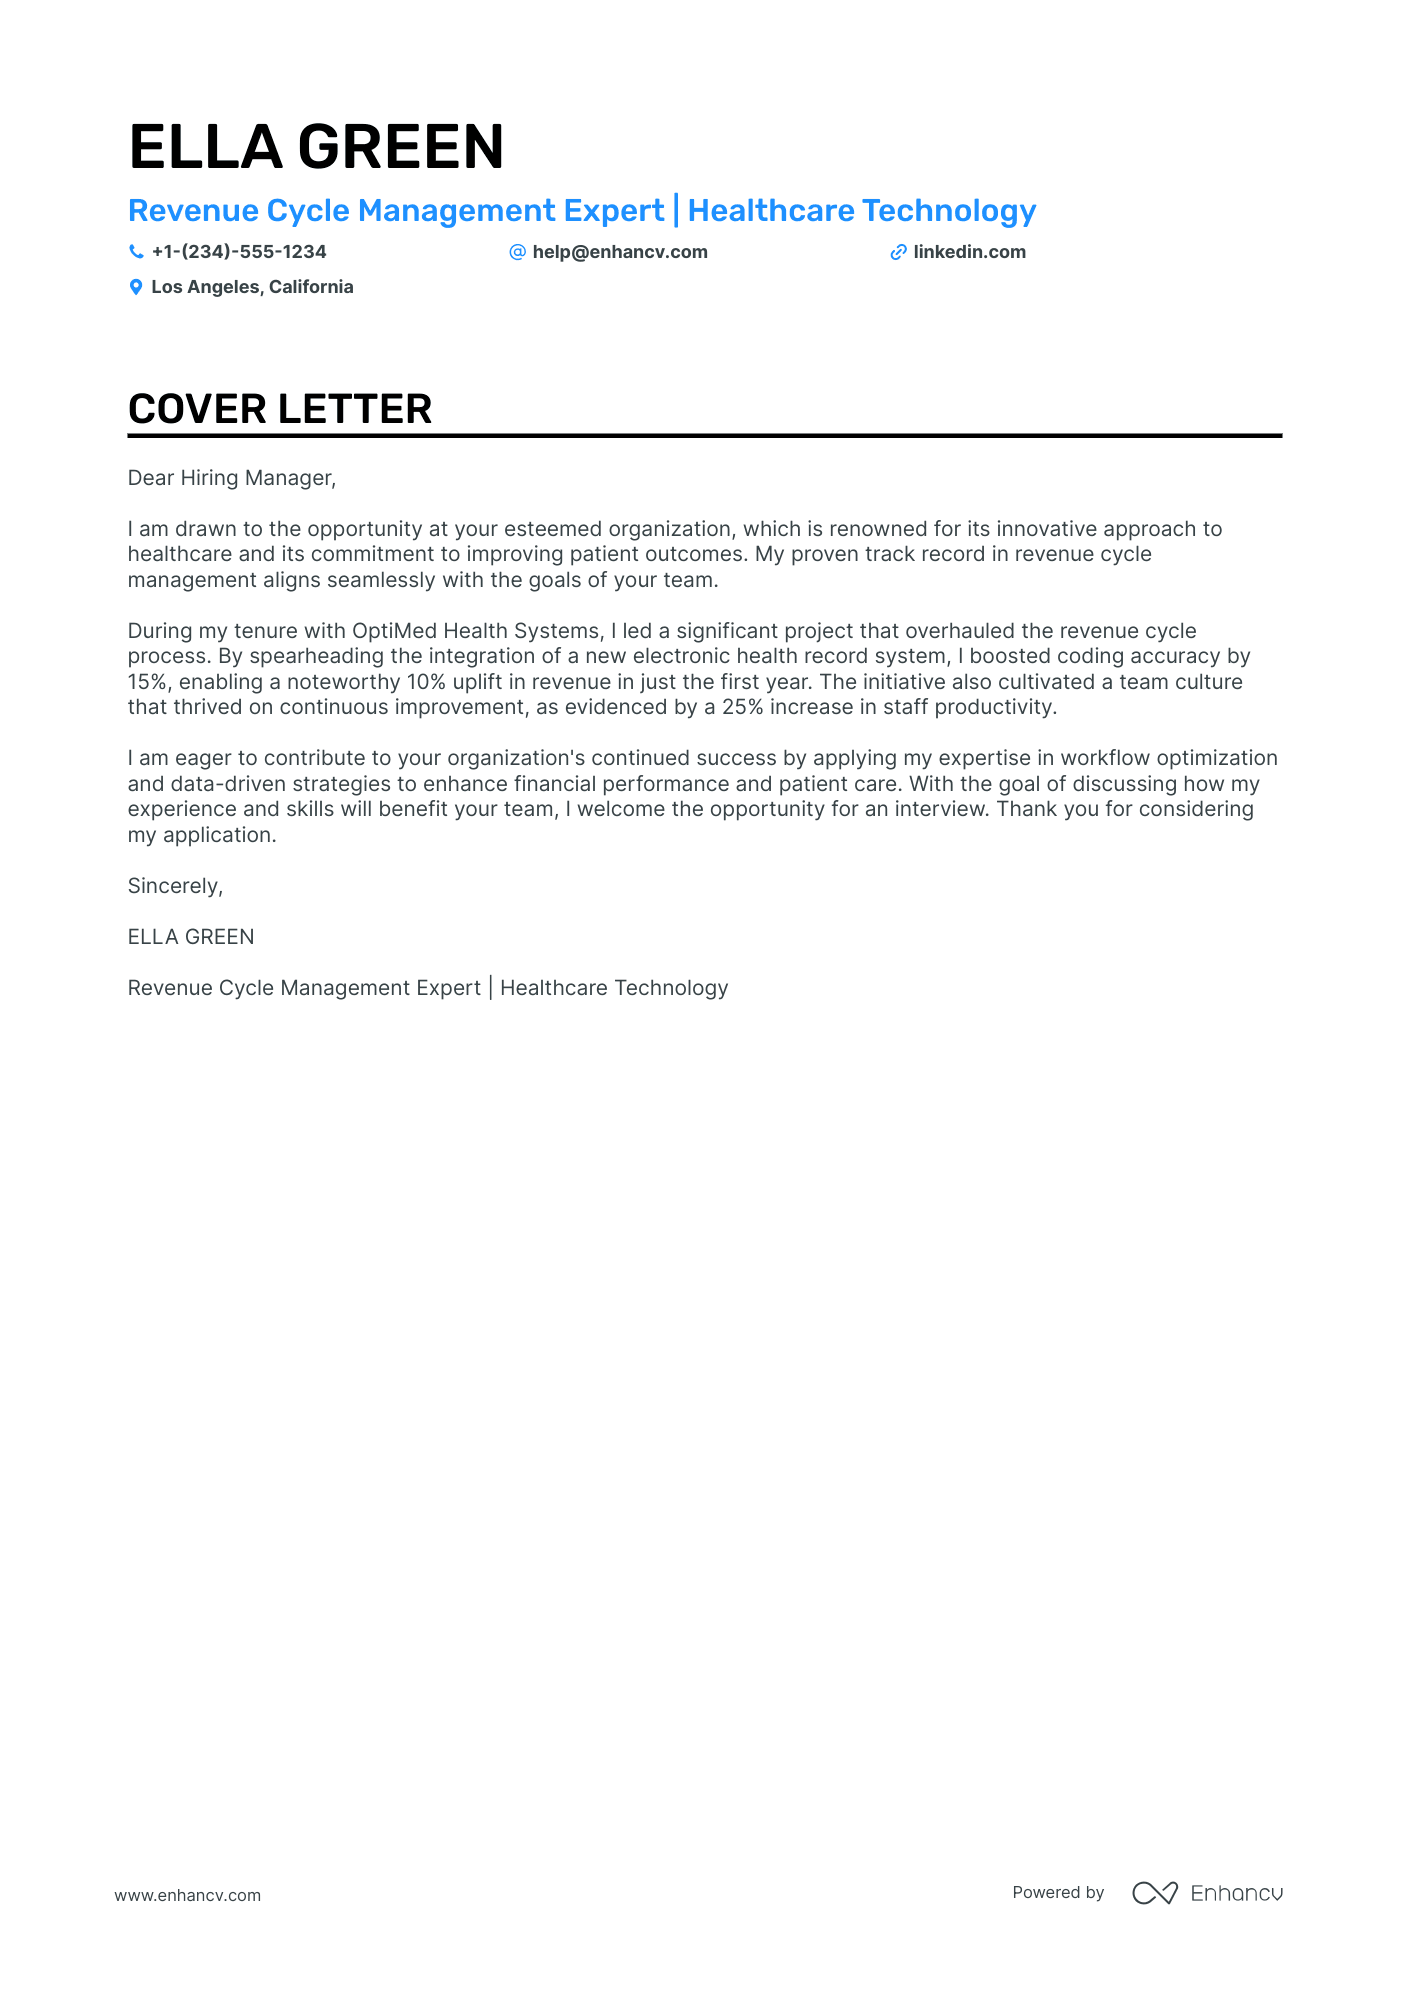 Revenue Cycle Manager cover letter